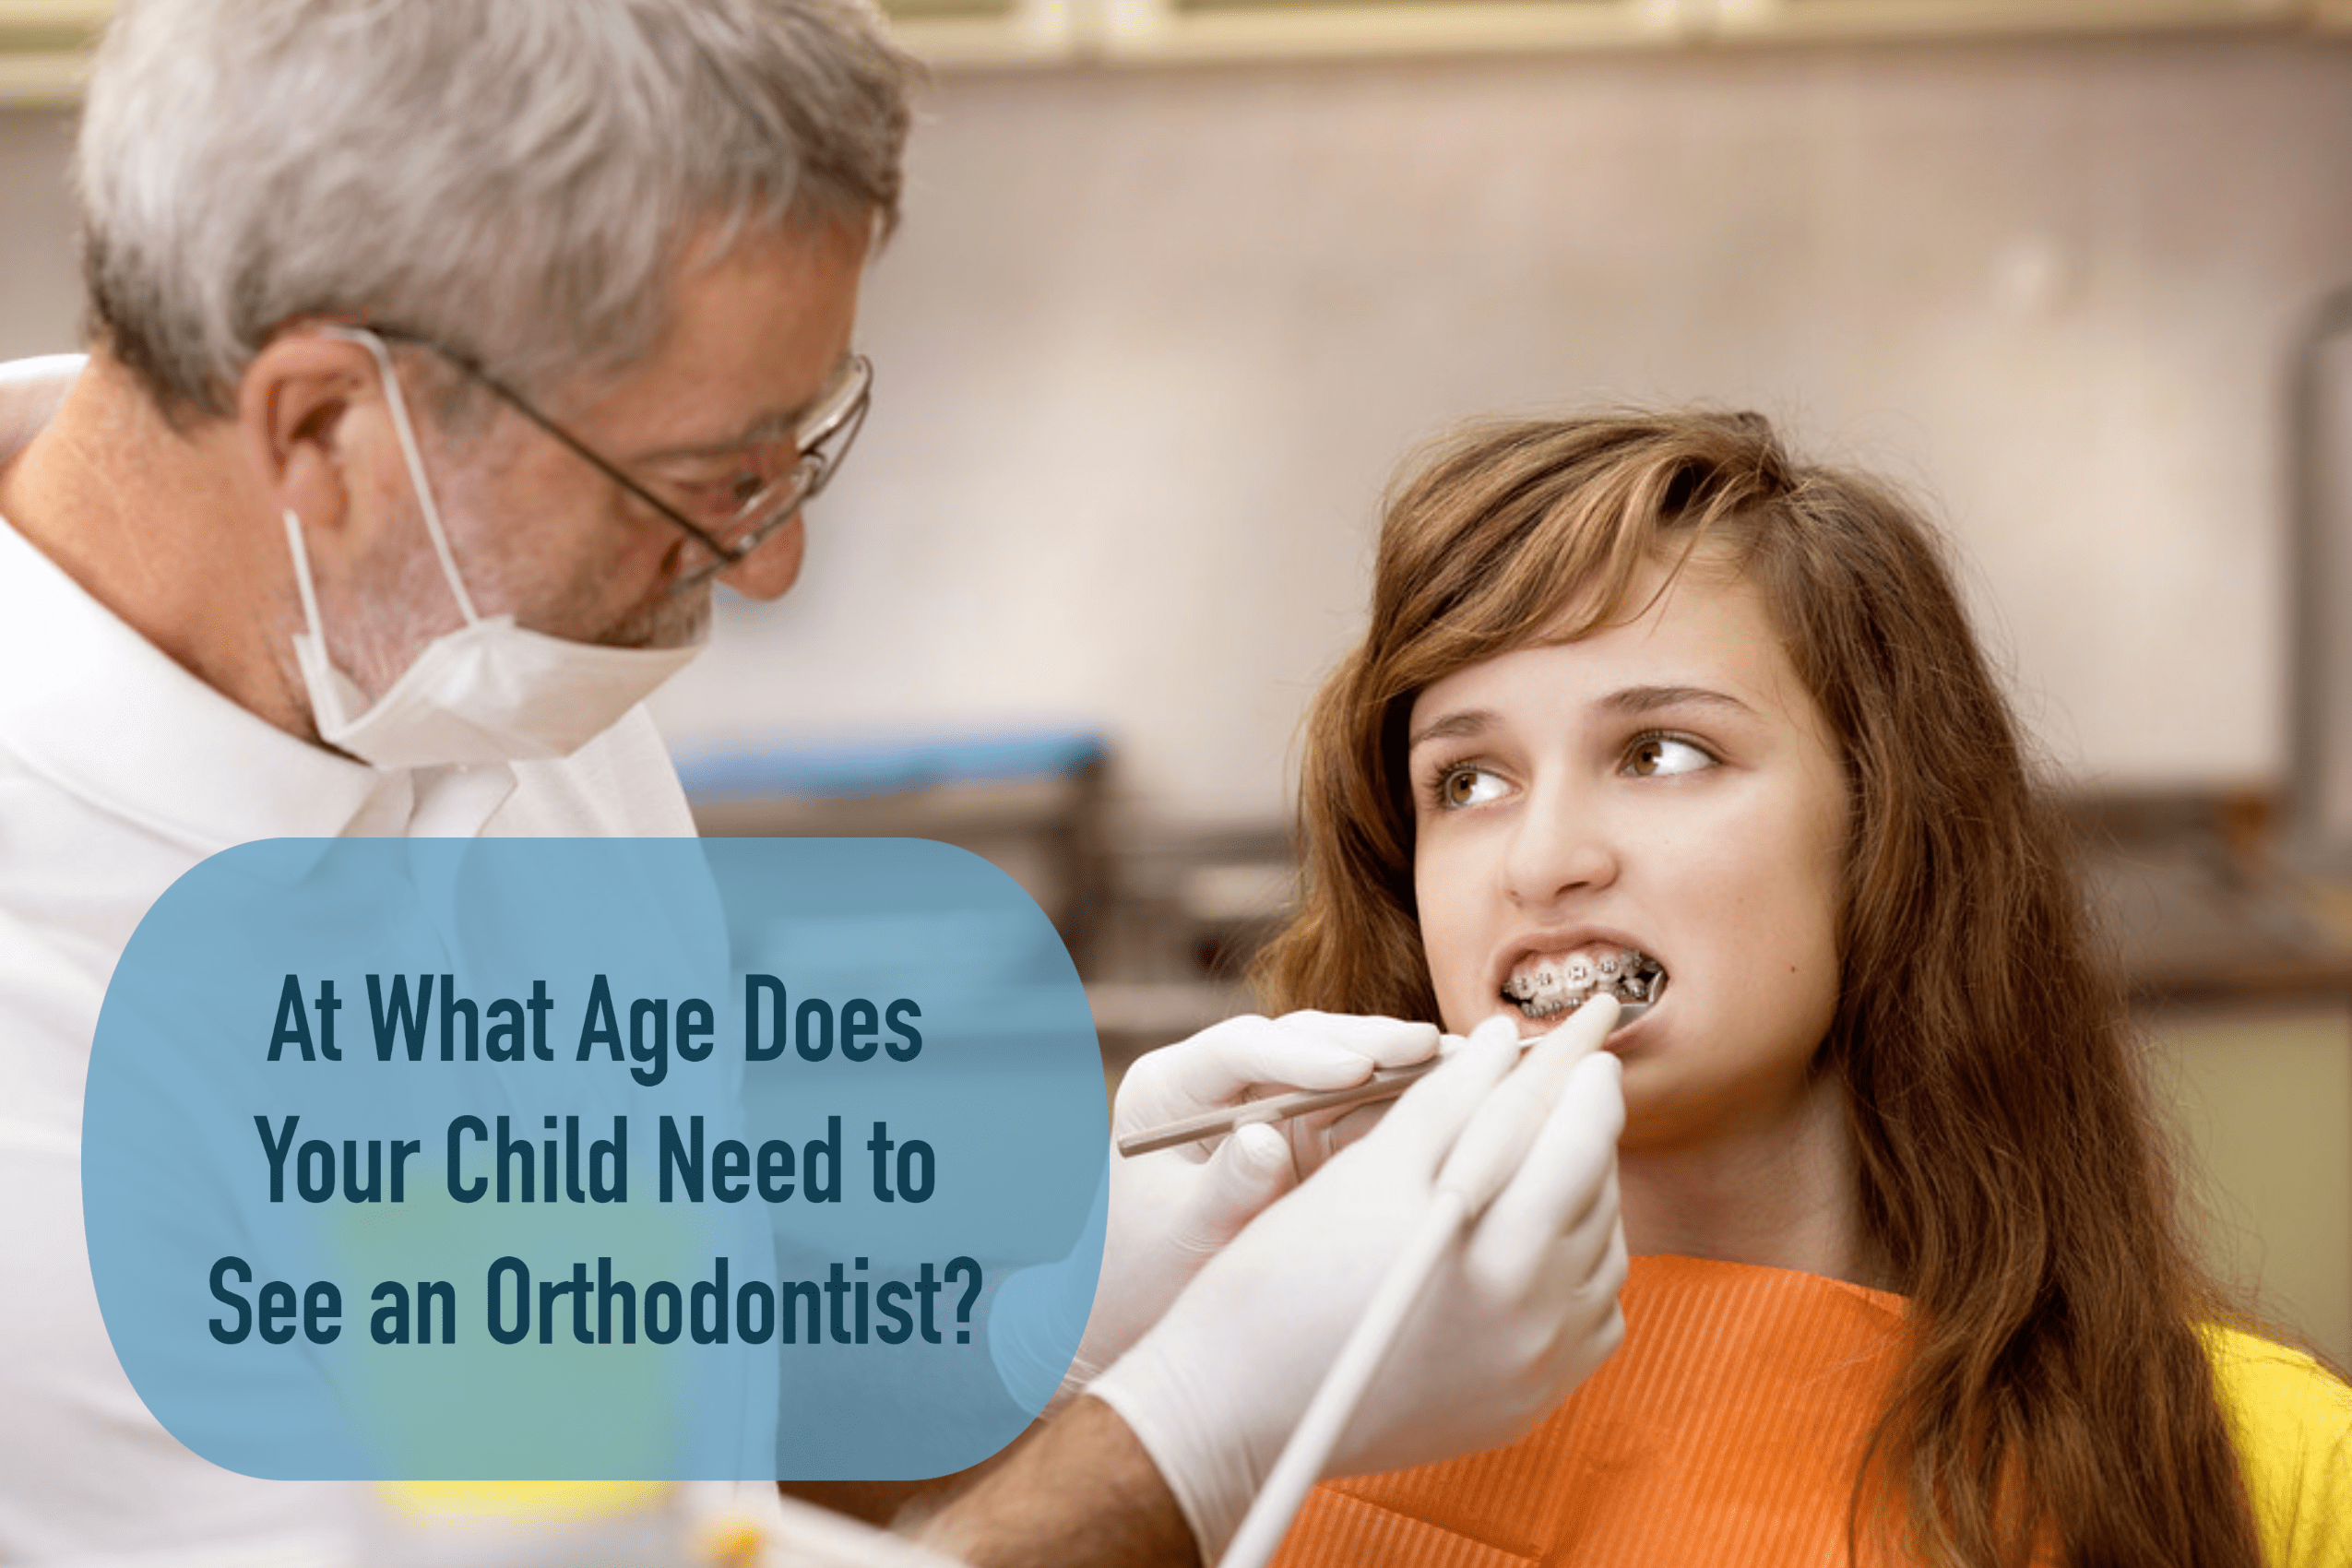 What Age Does Your Child Need to See an Orthodontist